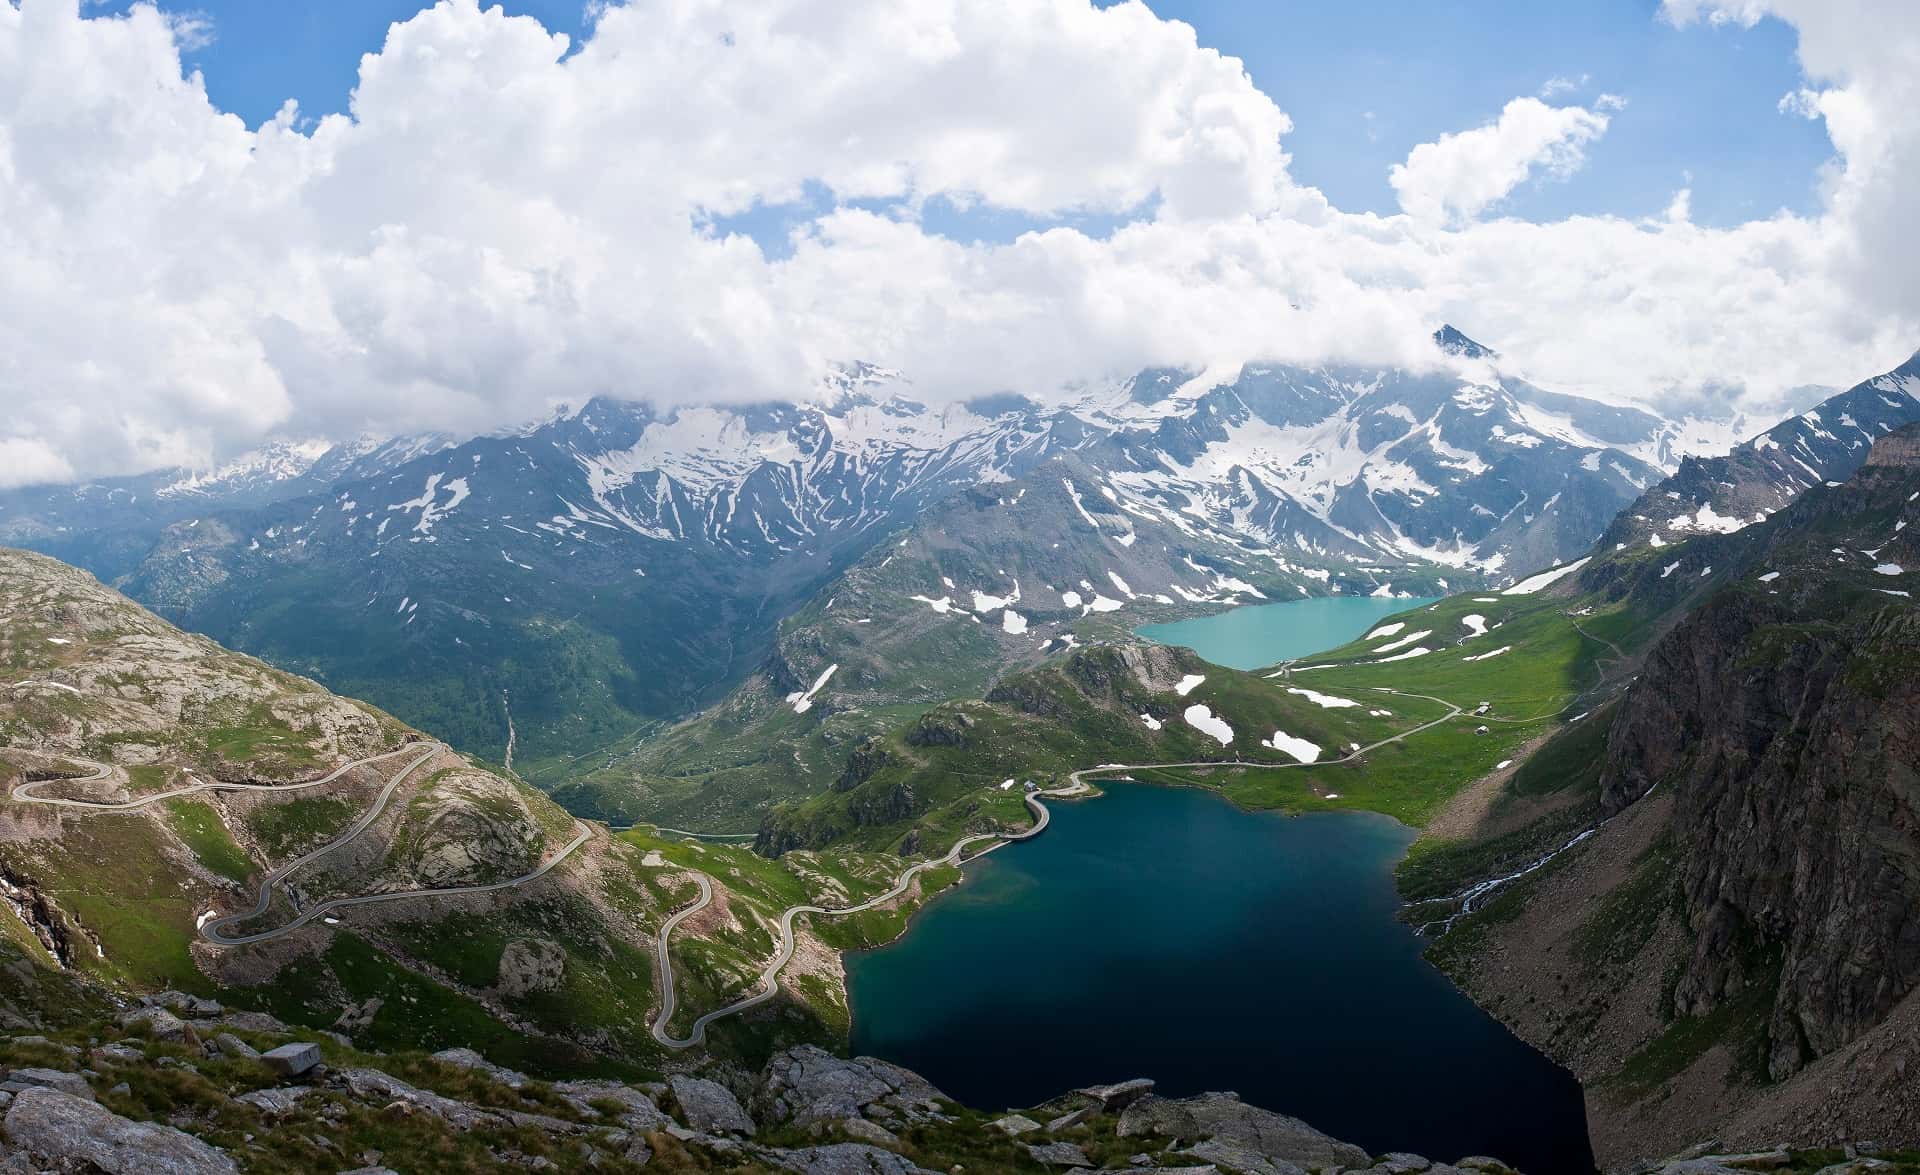 View of the Gran Paradiso National Park from above